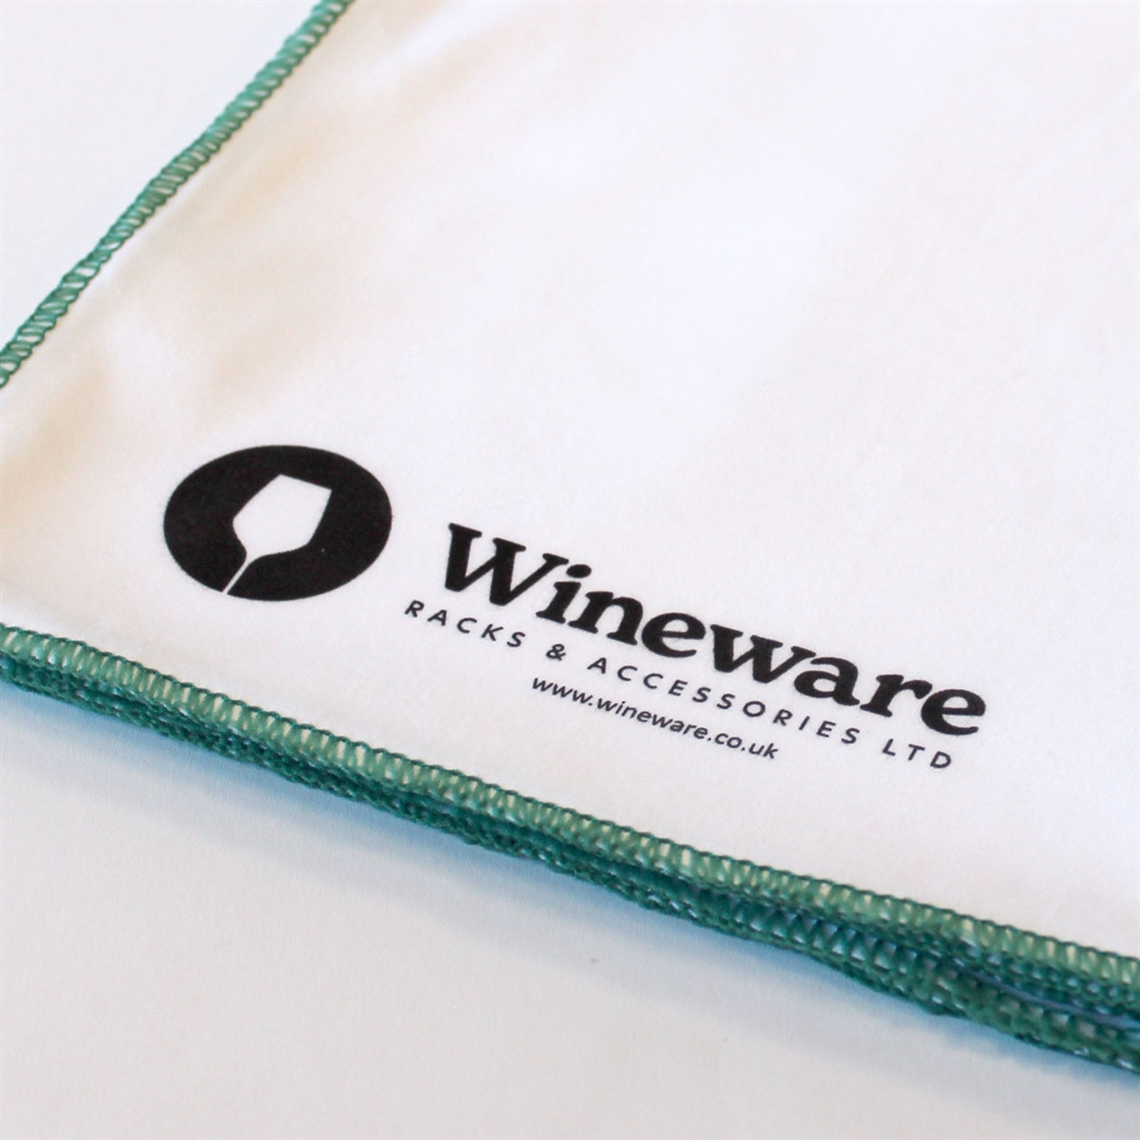 View more wine decanter cleaning from our Wine Decanter Cleaning range